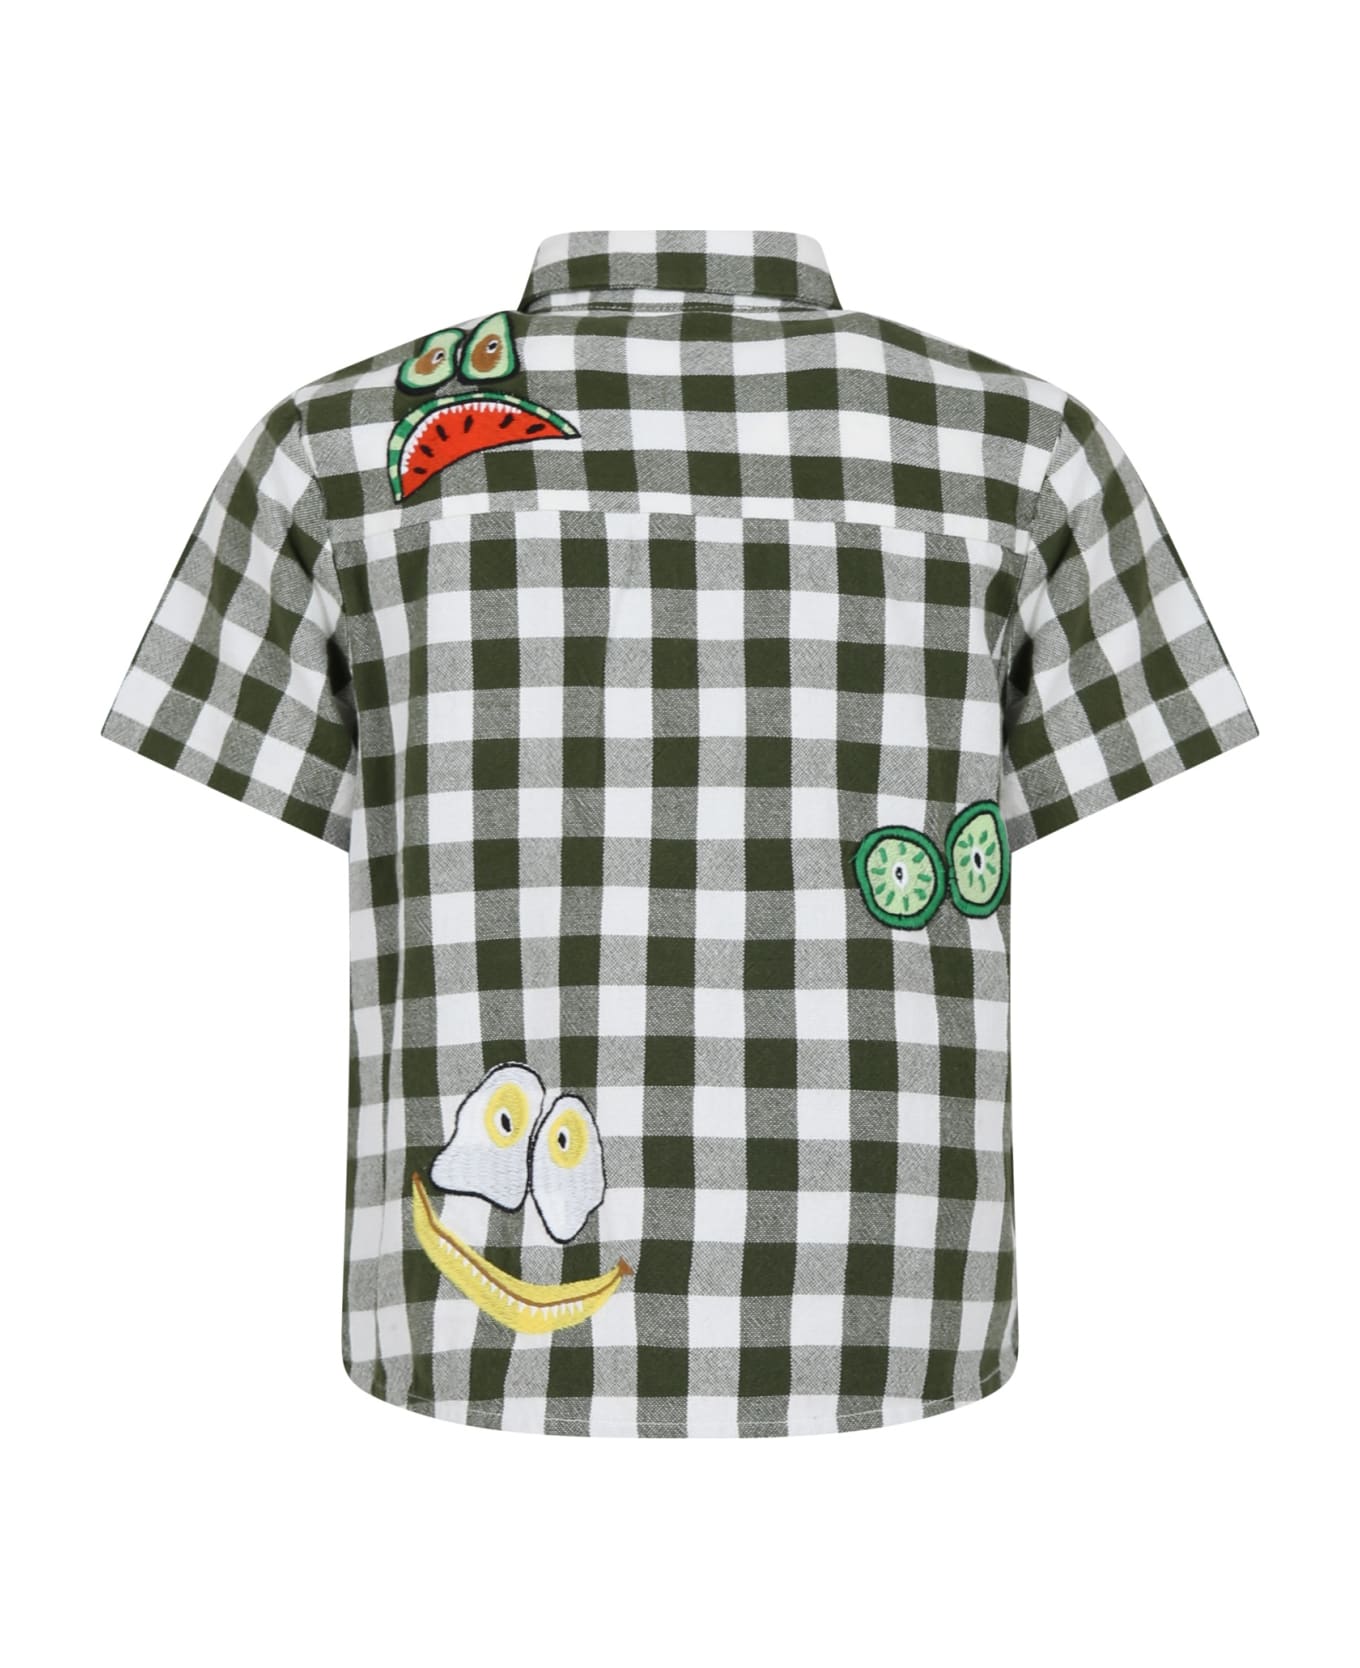 Stella McCartney Kids Green Shirt For Boy With All-over Pattern - Green シャツ